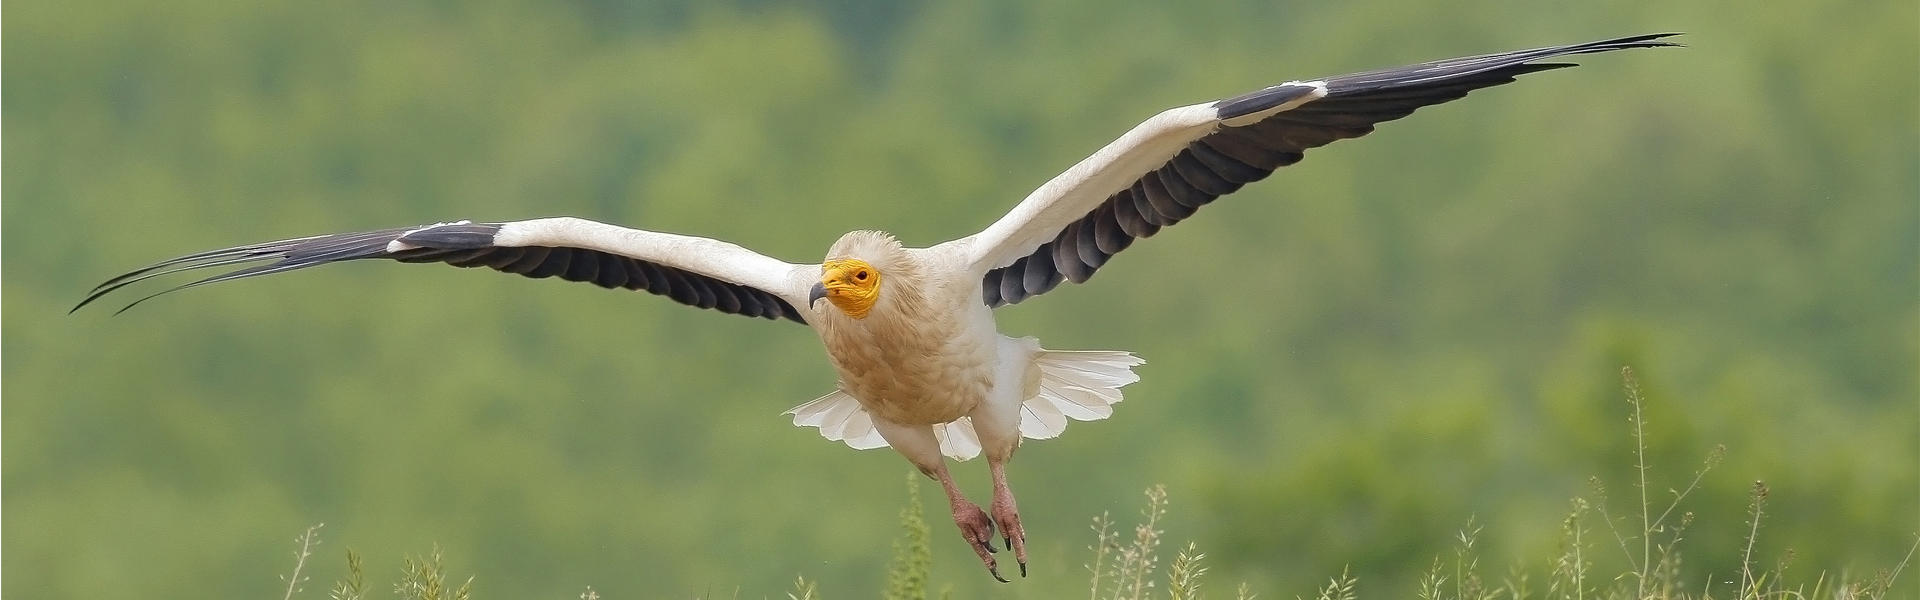 Egyptian Vulture New LIFE Project